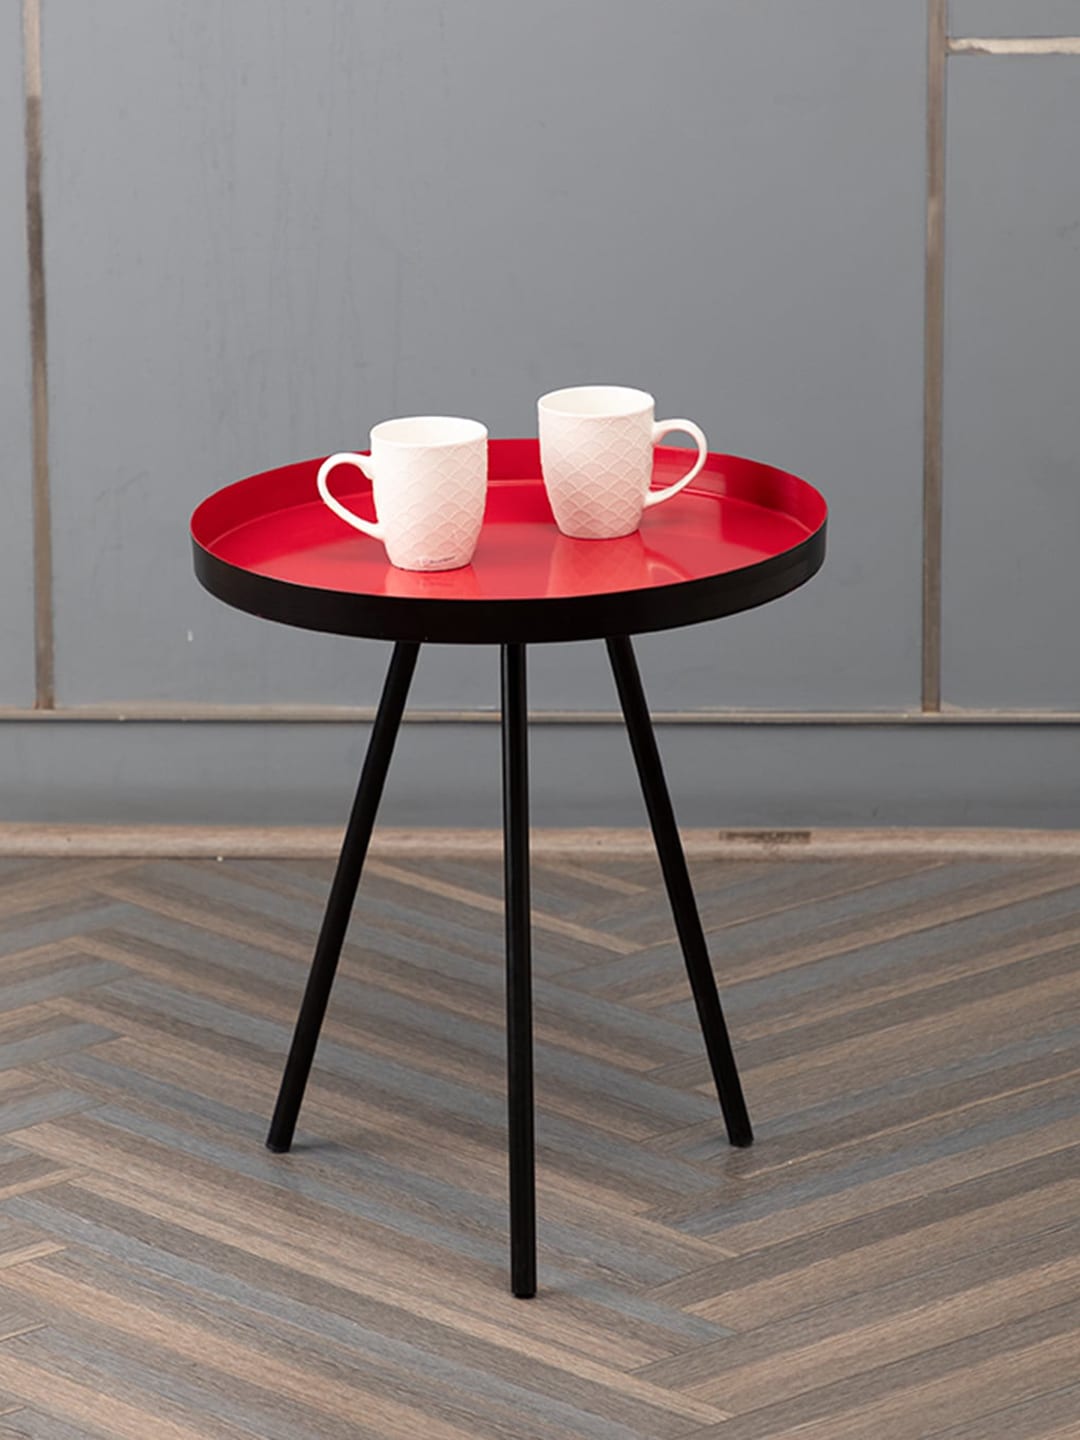 MARKET99 Red & Black Metal Round Side Table Price in India